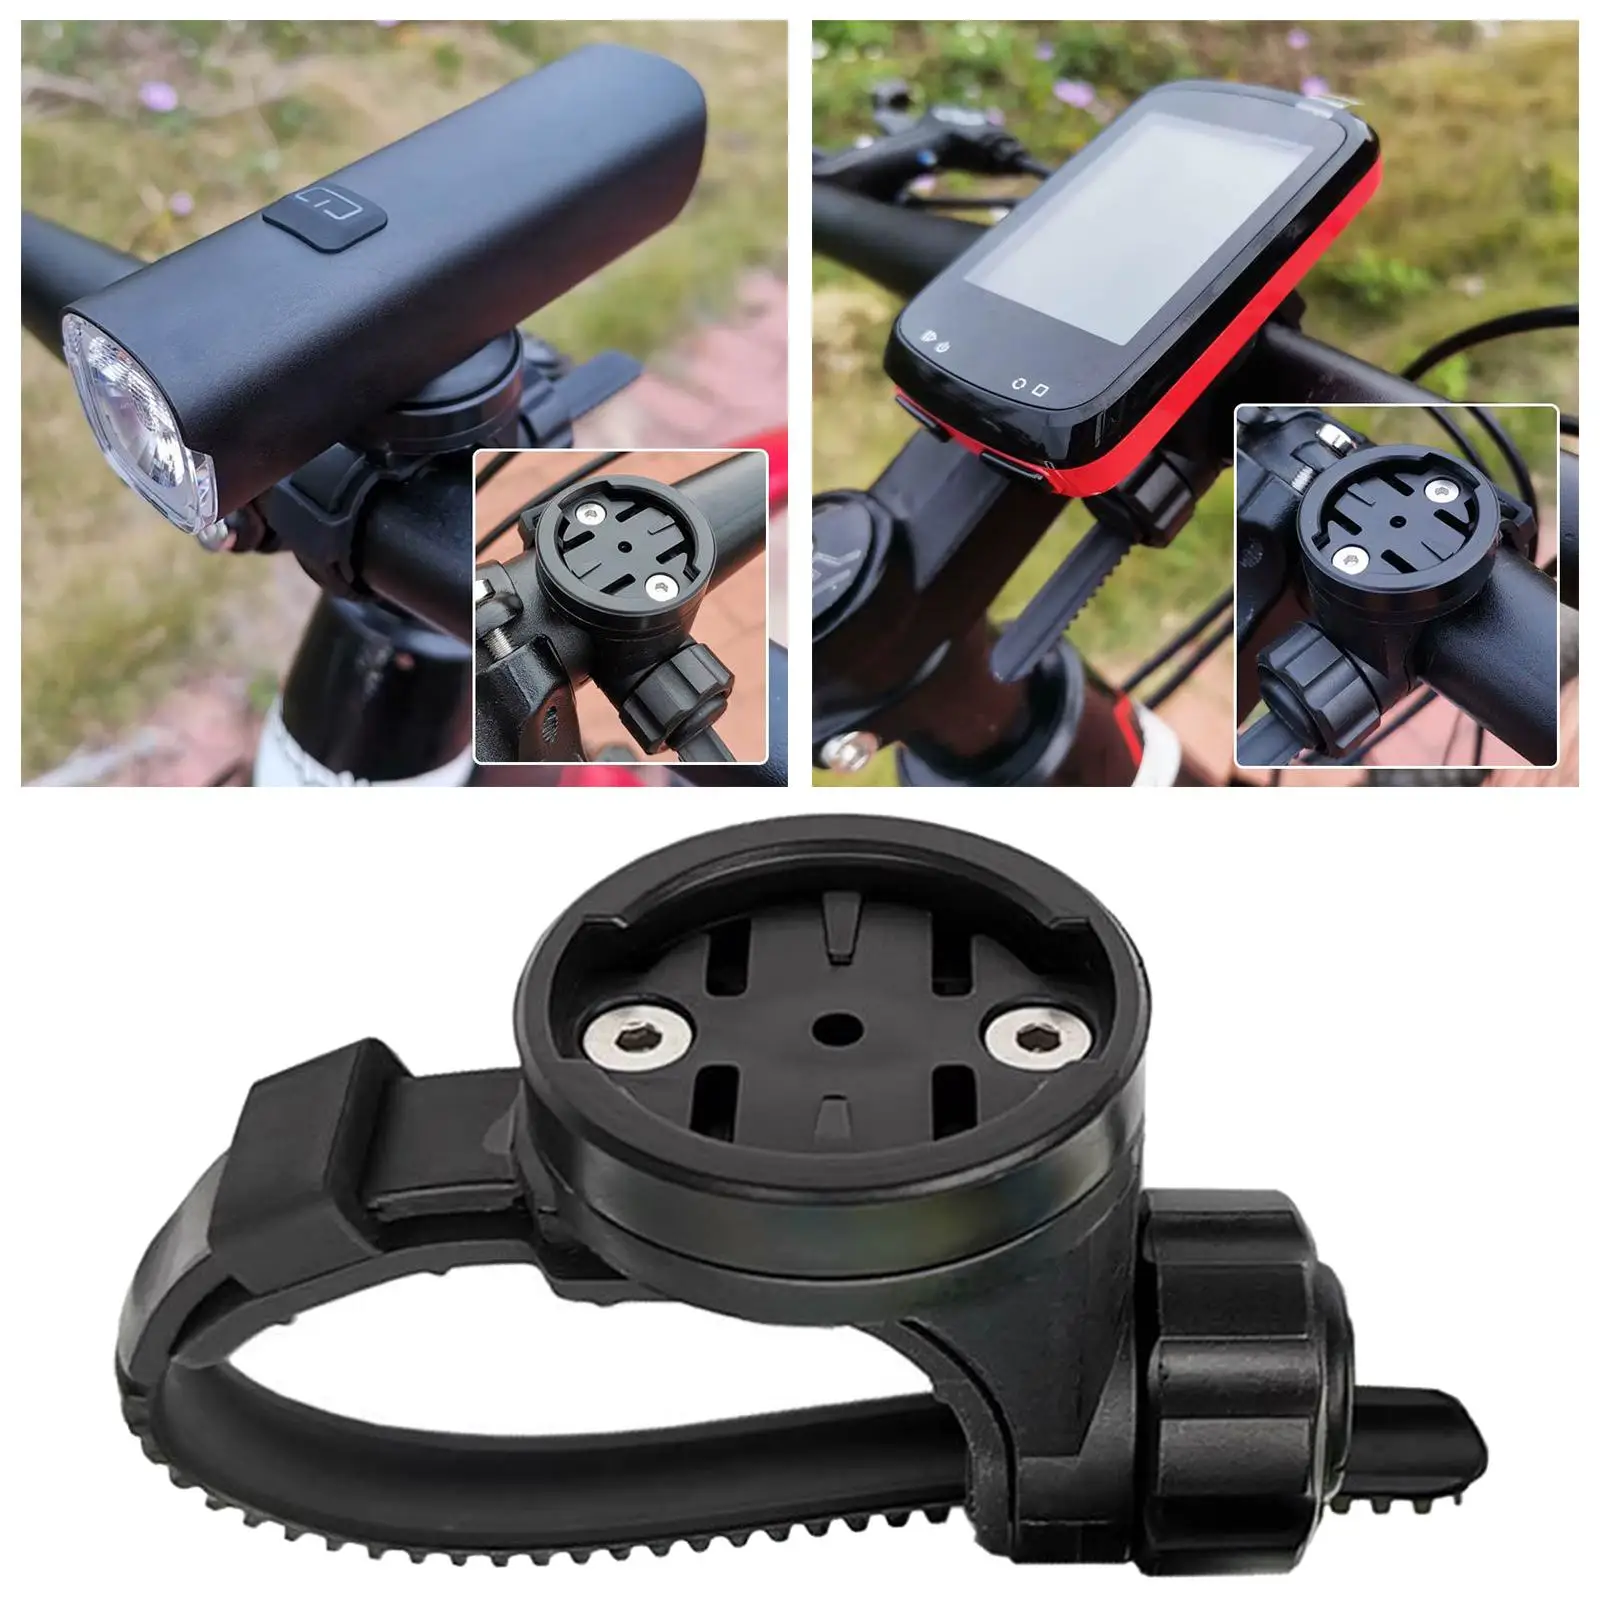 Bicycle Handlebar Computer Holder Speedometer Mount Holder for Cycling Motorcycle